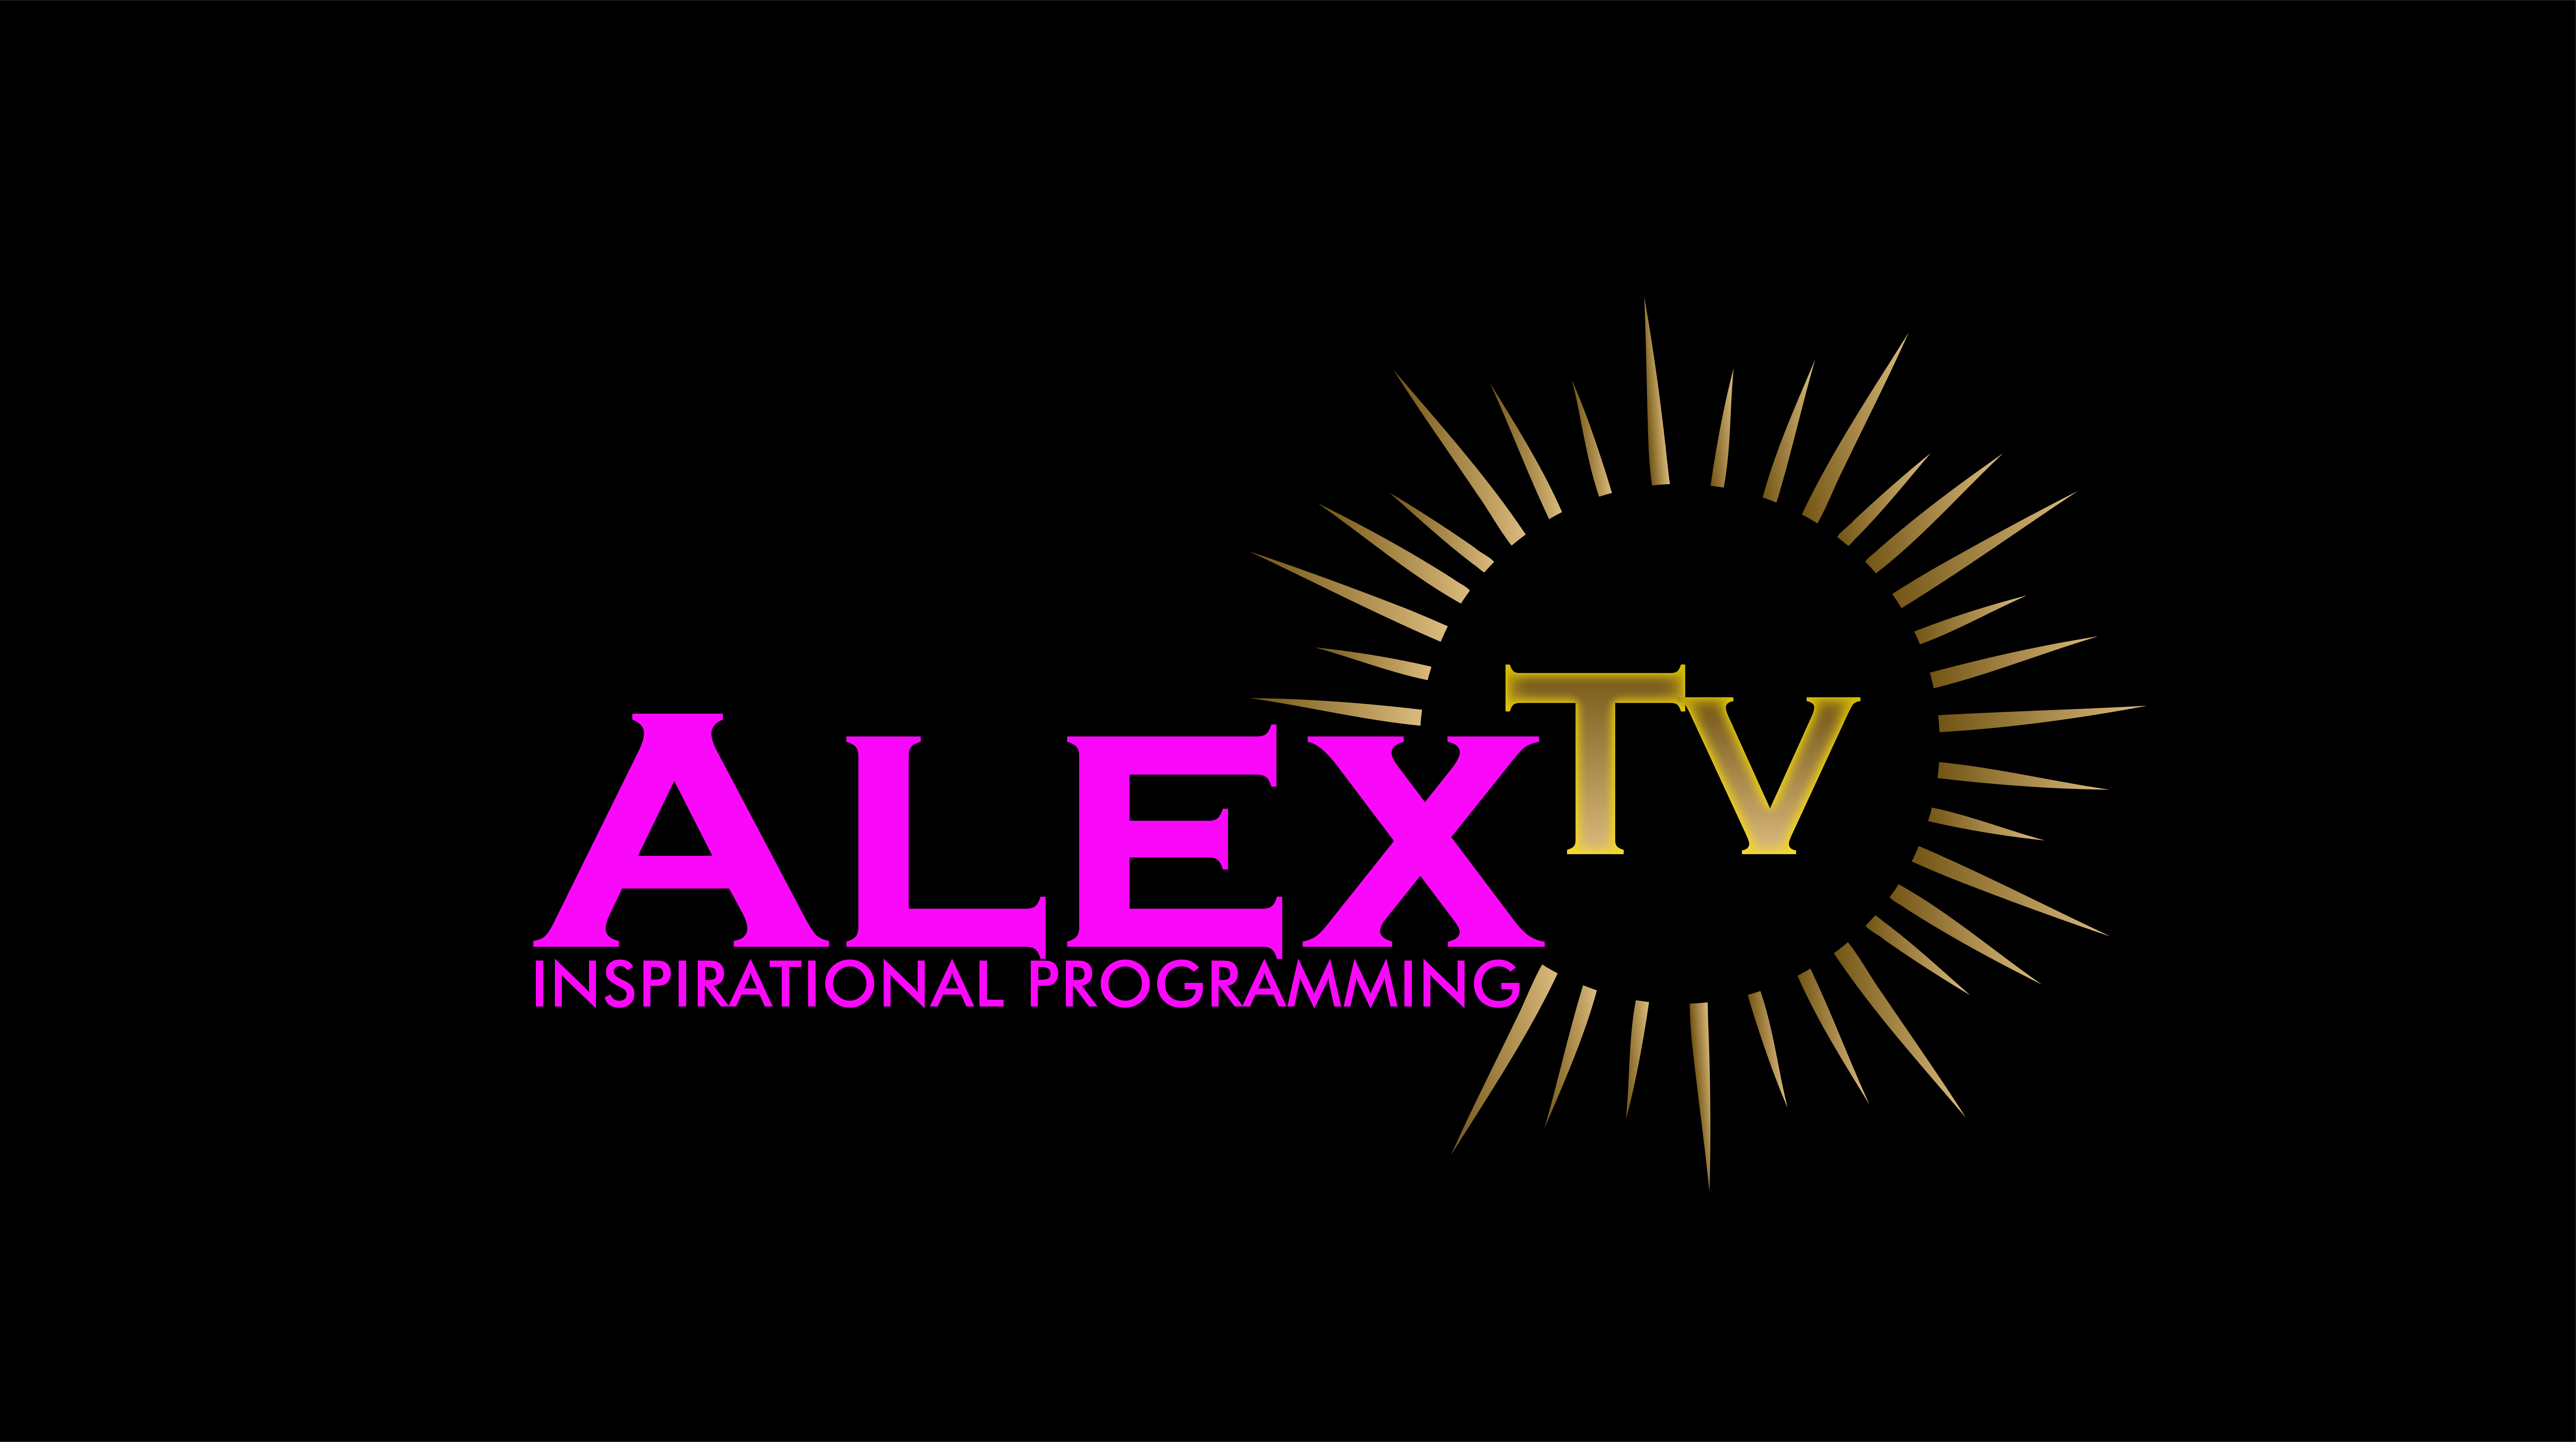 Alex TV Studios Launches New Inspirational Streaming Channel On Roku